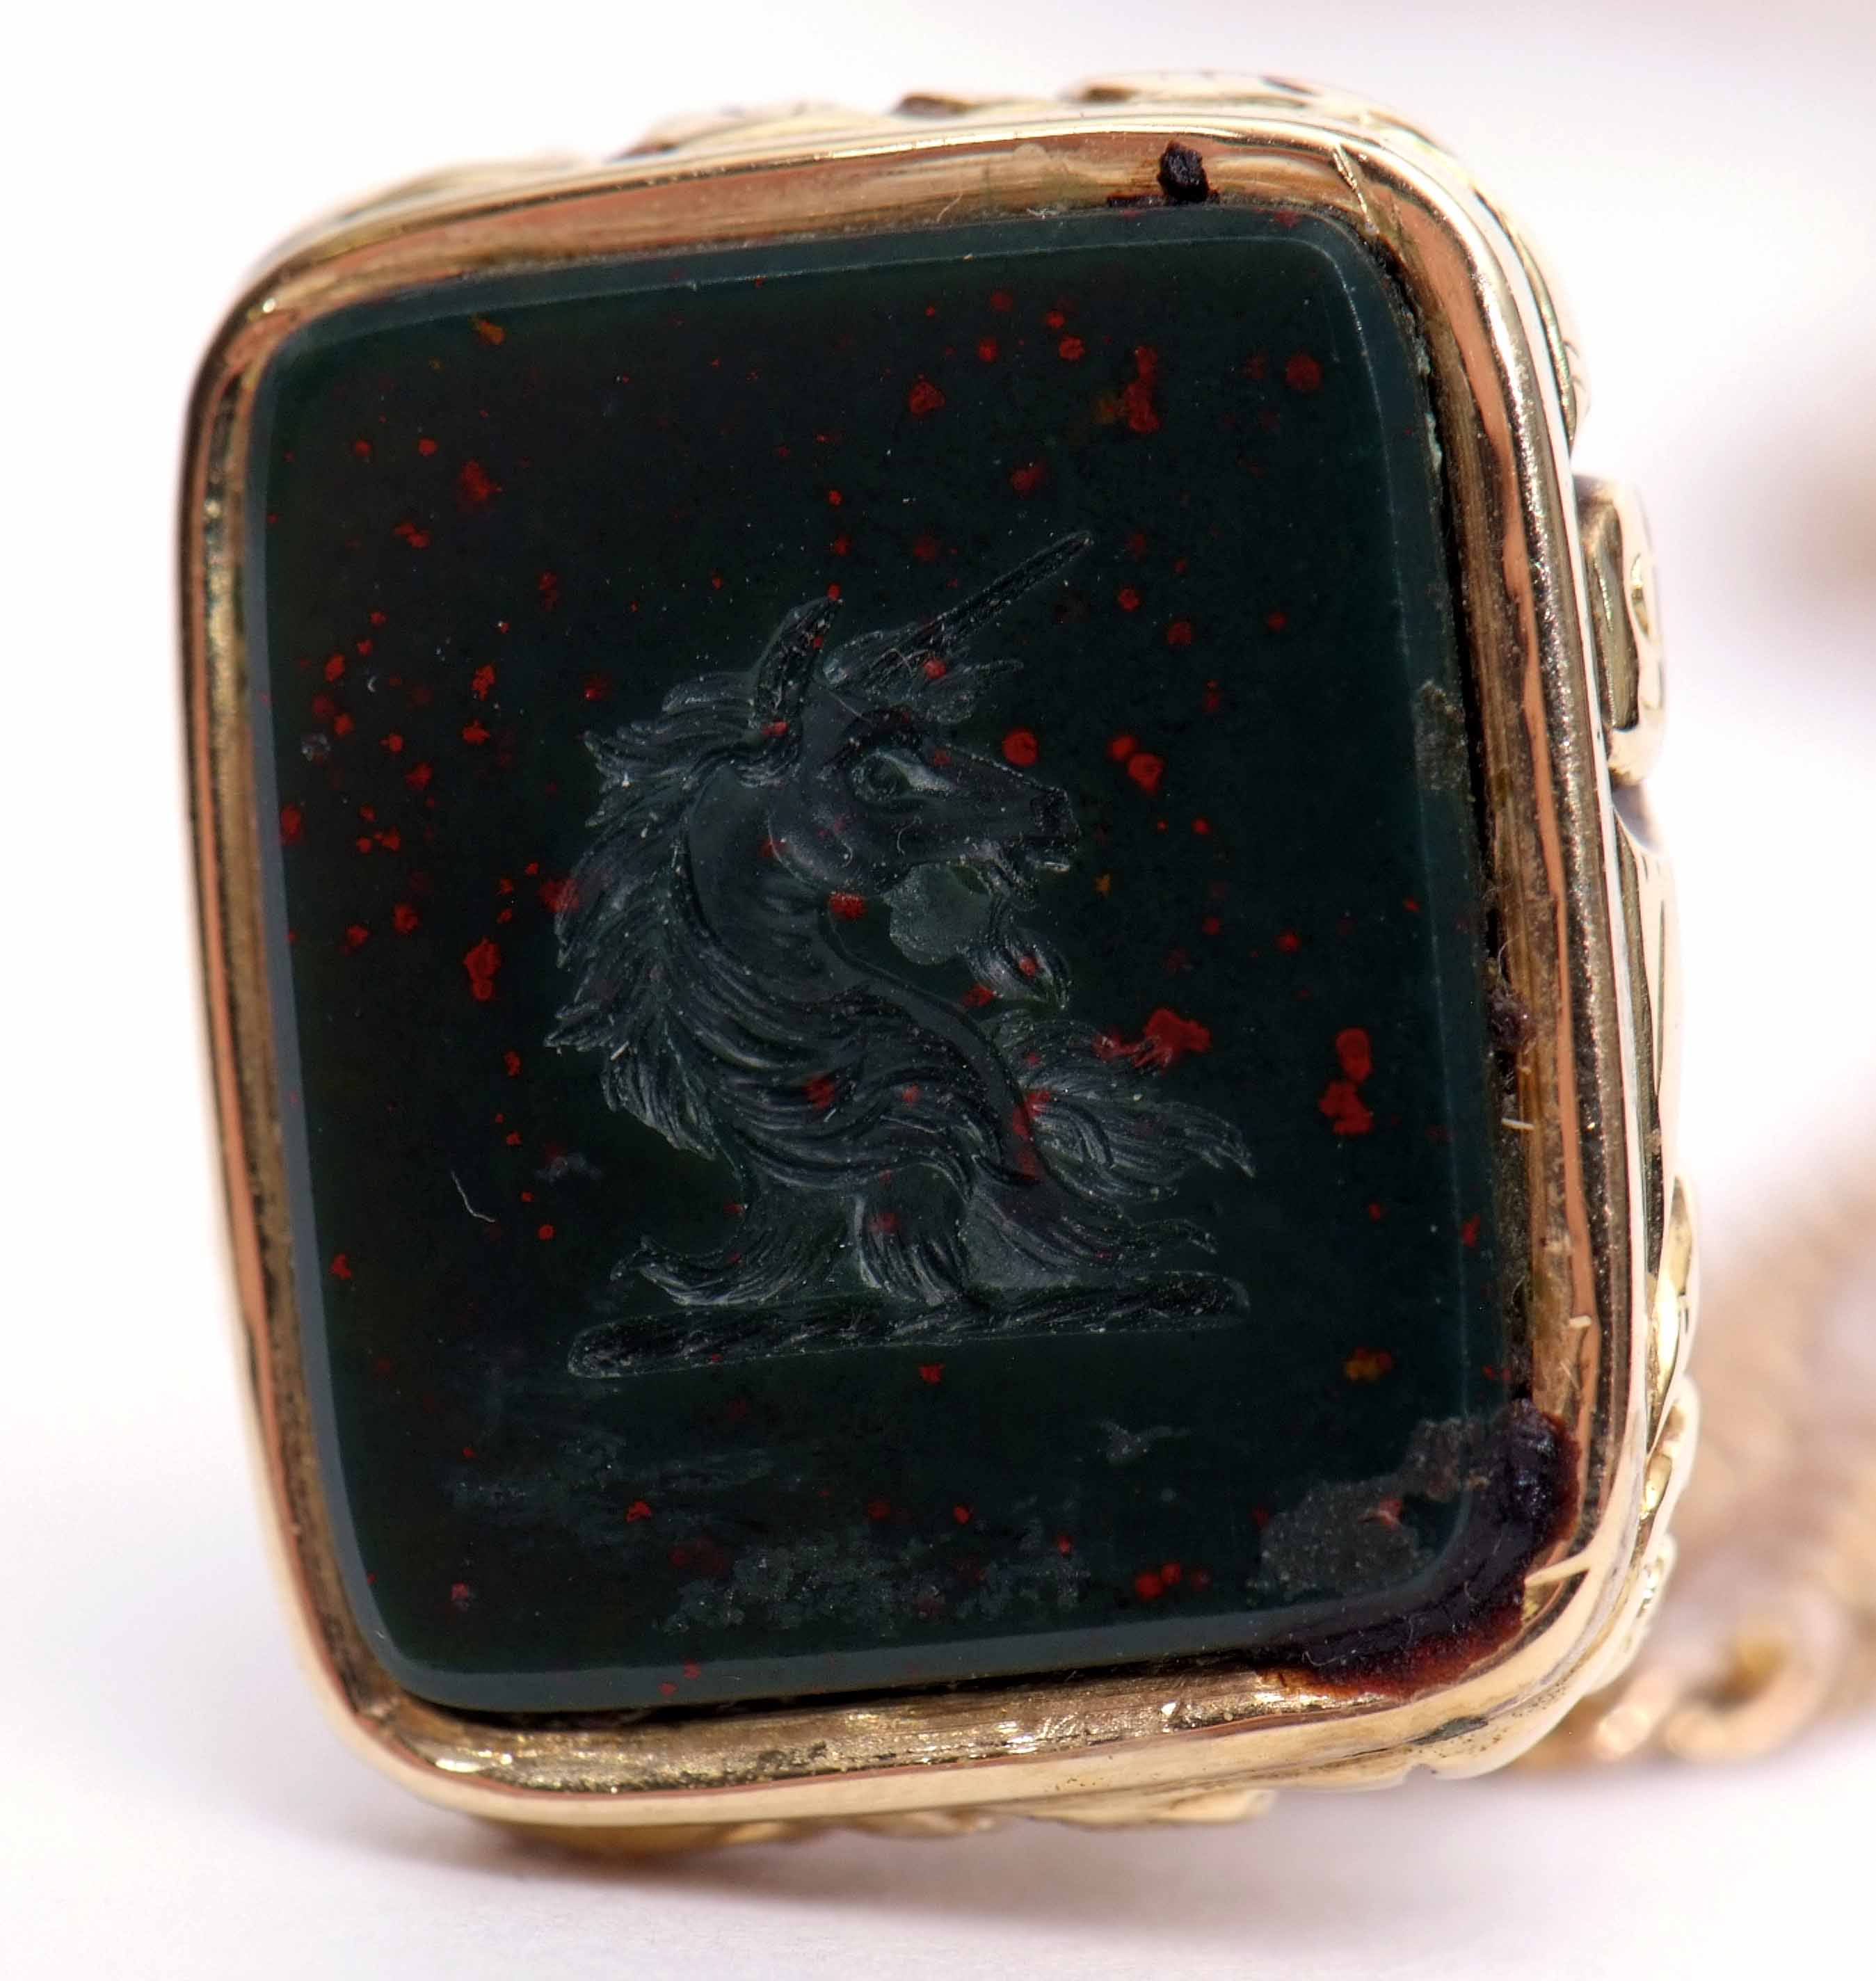 Gold and gold-cased early 19th century bloodstone mounted fob seal, well carved with a profile of - Image 4 of 4